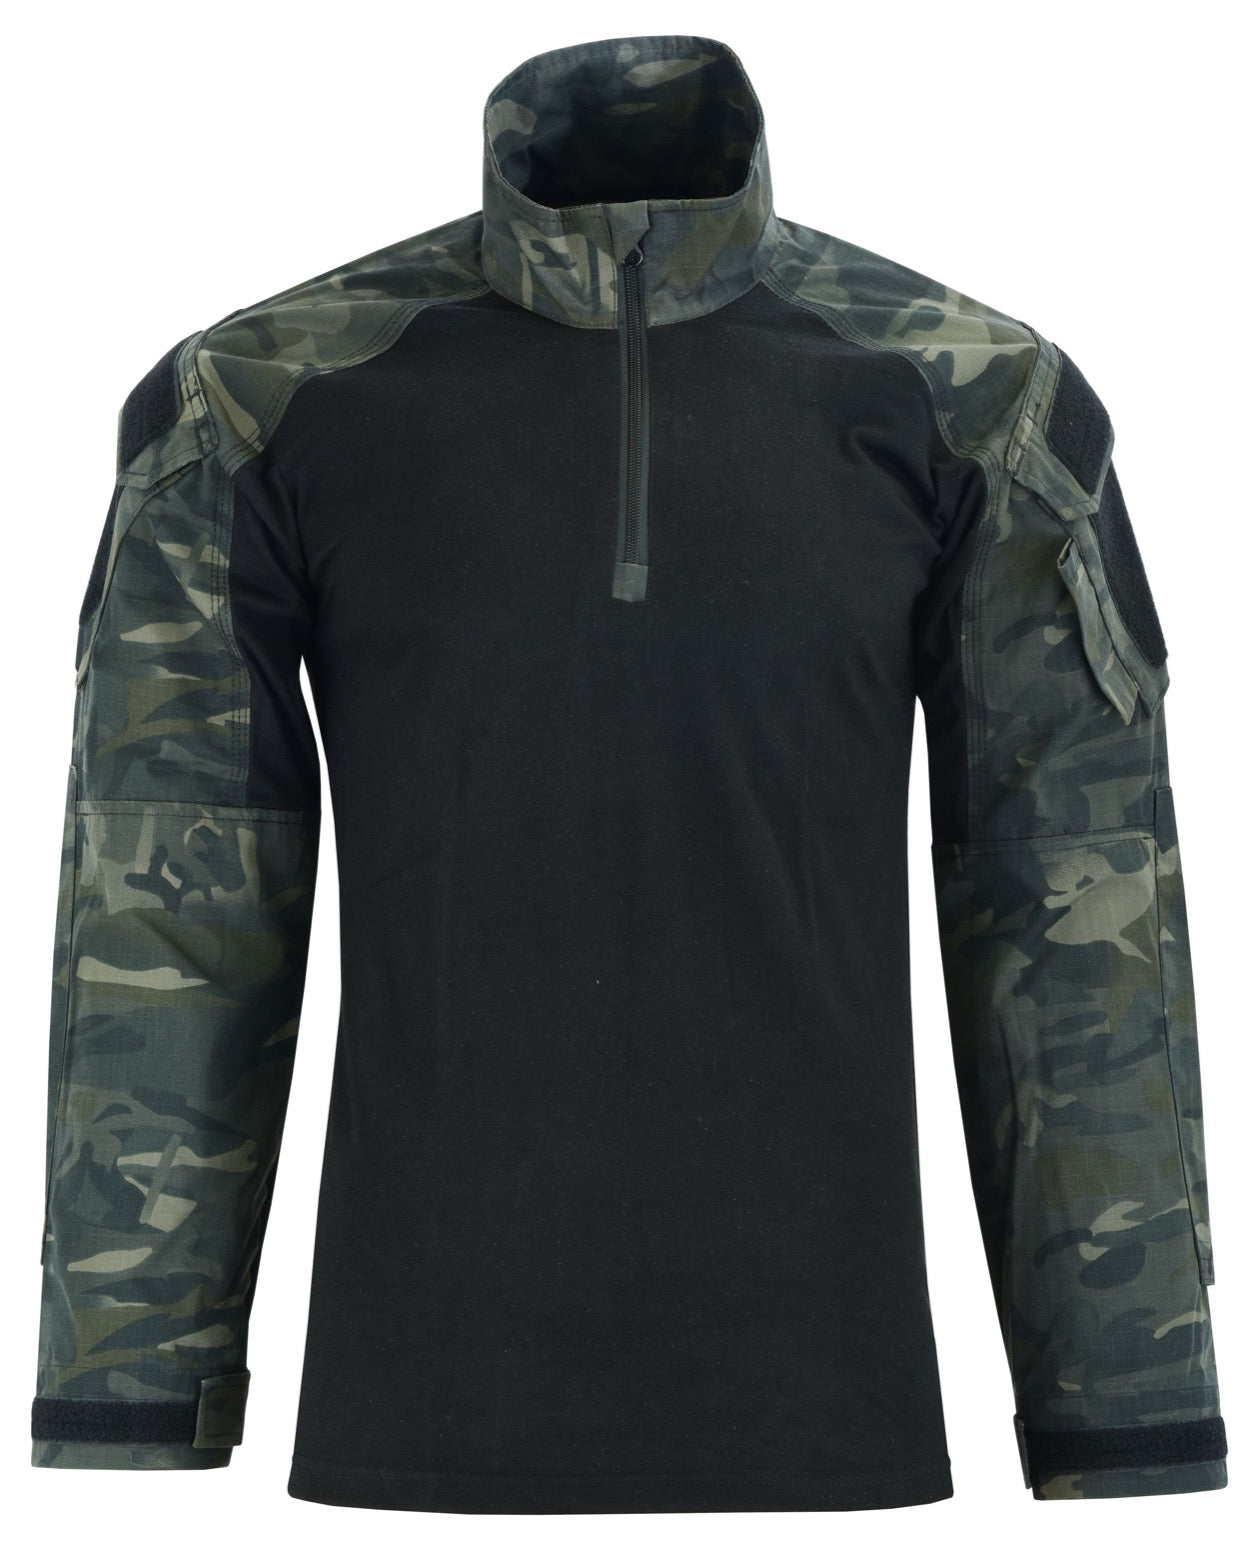 Tactical Zone HYBRID TACTICAL SHIRT IS A PERFECT COMBAT SHIRT Colour  UTP-DarkNight front